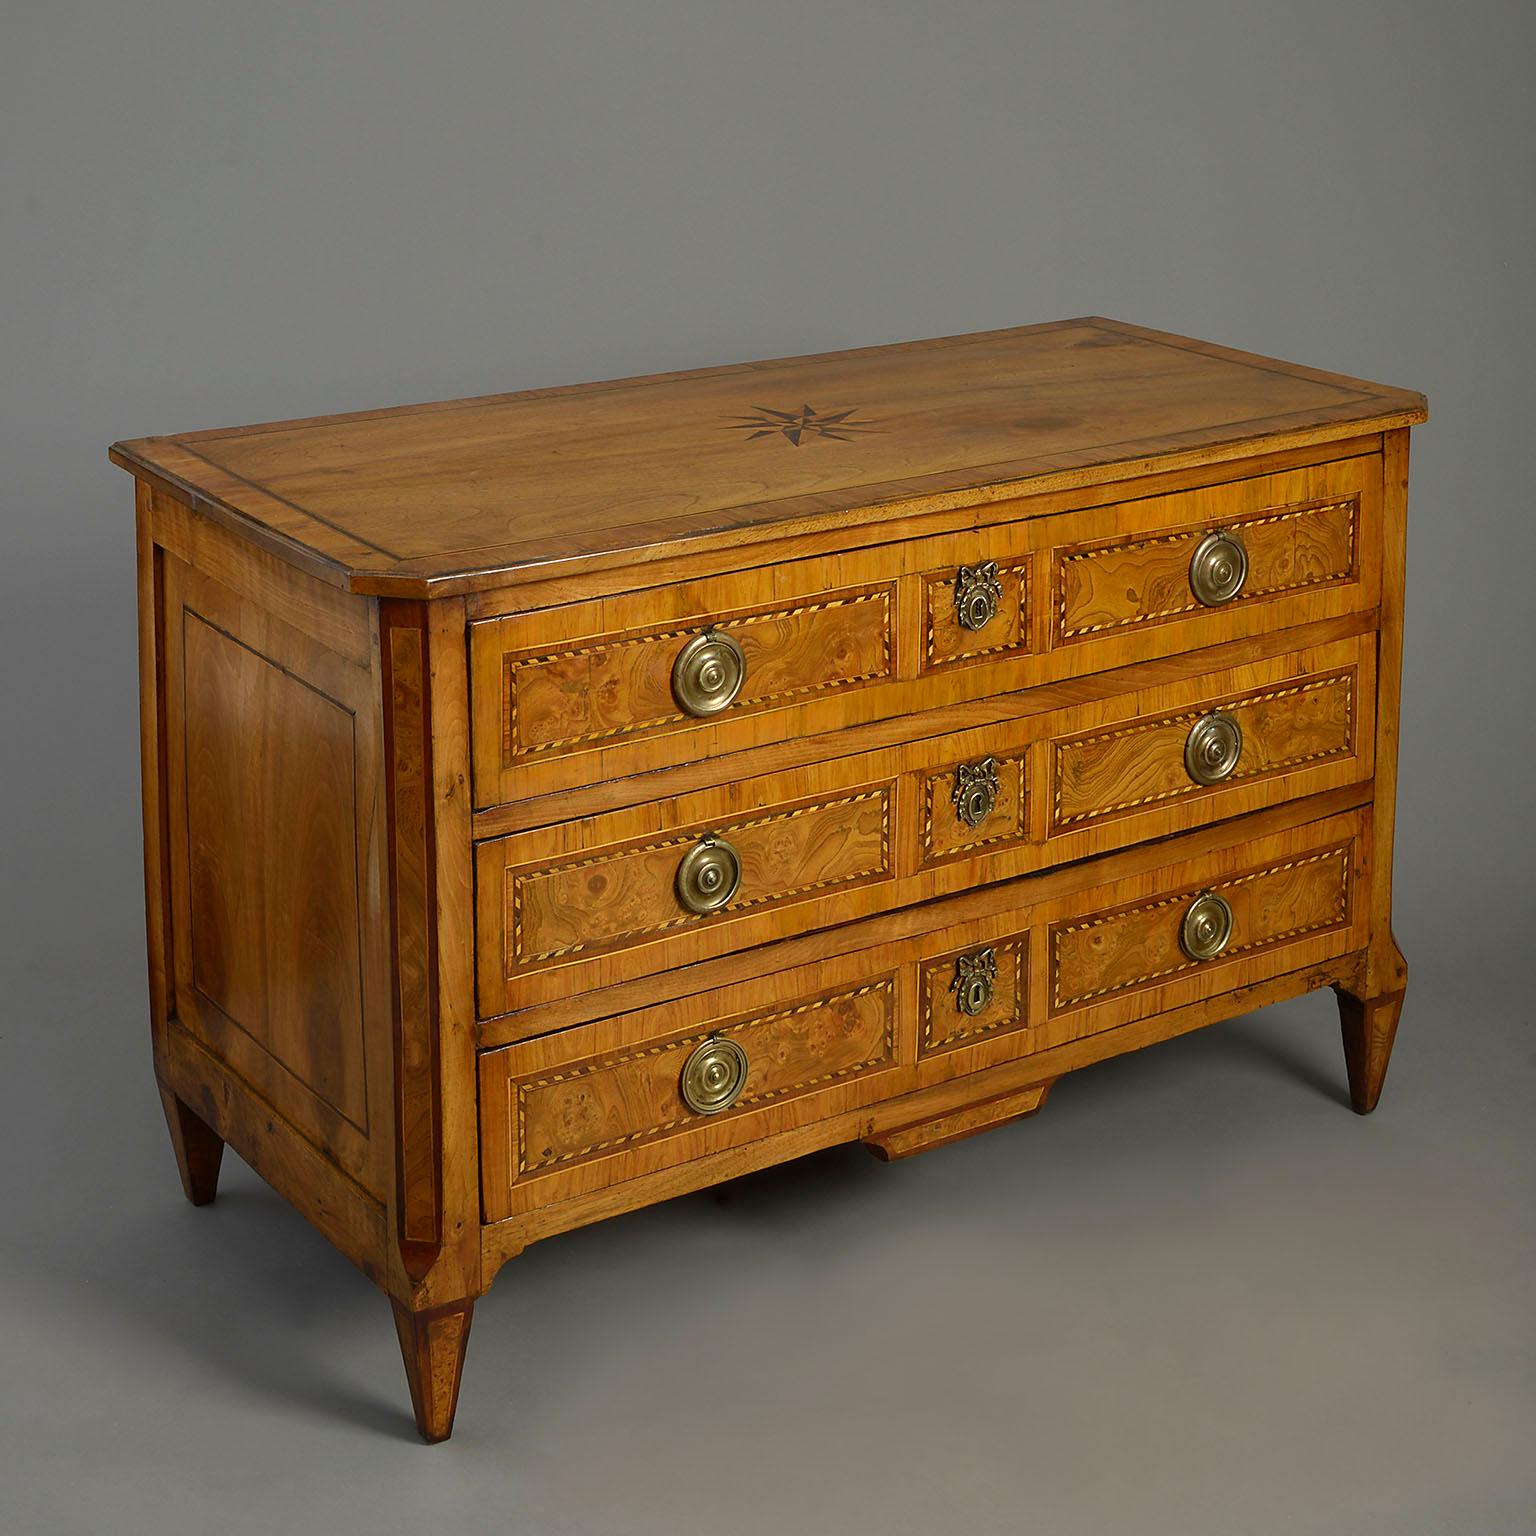 An 18 century Louis XVI Period walnut parquetry commode, the top inlaid with a star motif, the three drawers with burr elm veneered panelling, brass lock escutcheons and handles, all raised on square tapering feet.